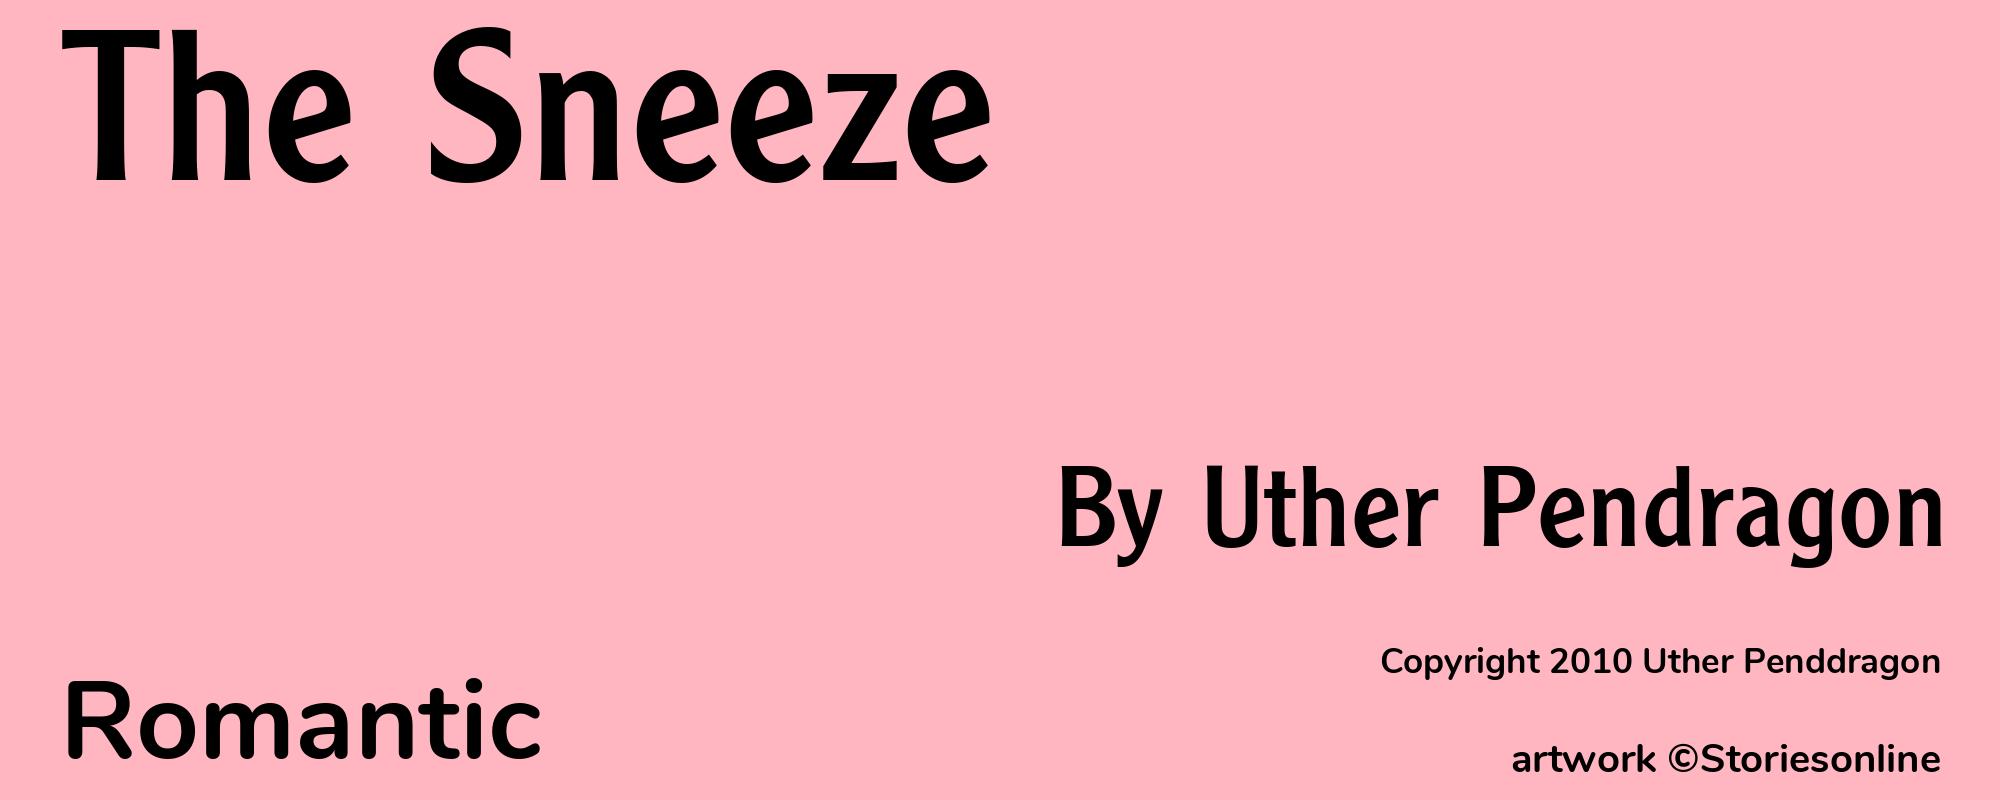 The Sneeze - Cover